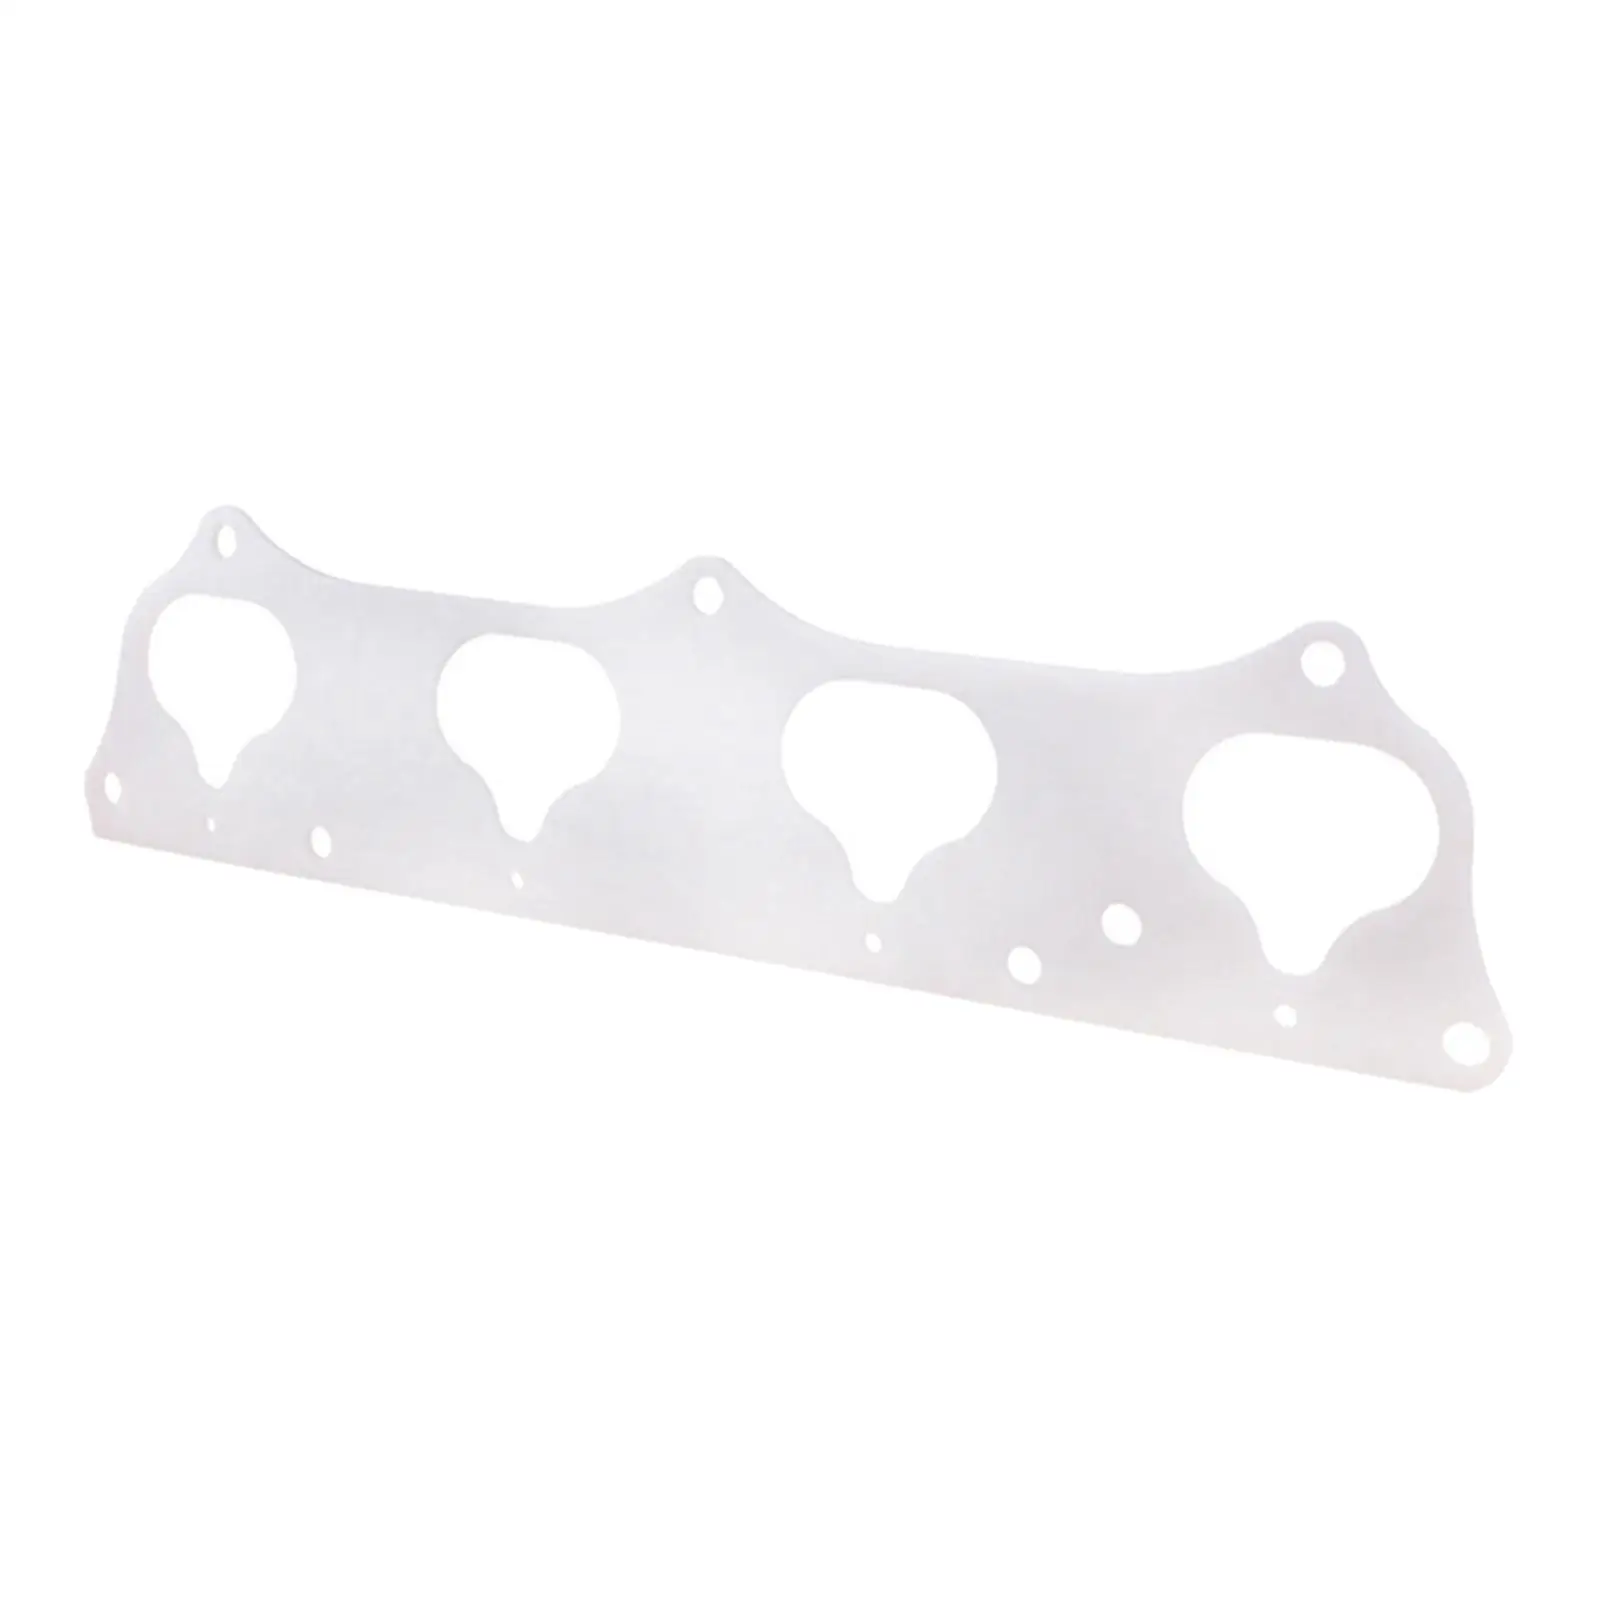 Thermal Intake Gasket, Accessories, High Performance, Premium, Durable, Spare Parts Replacement for K20A/A2/A3/Z1 